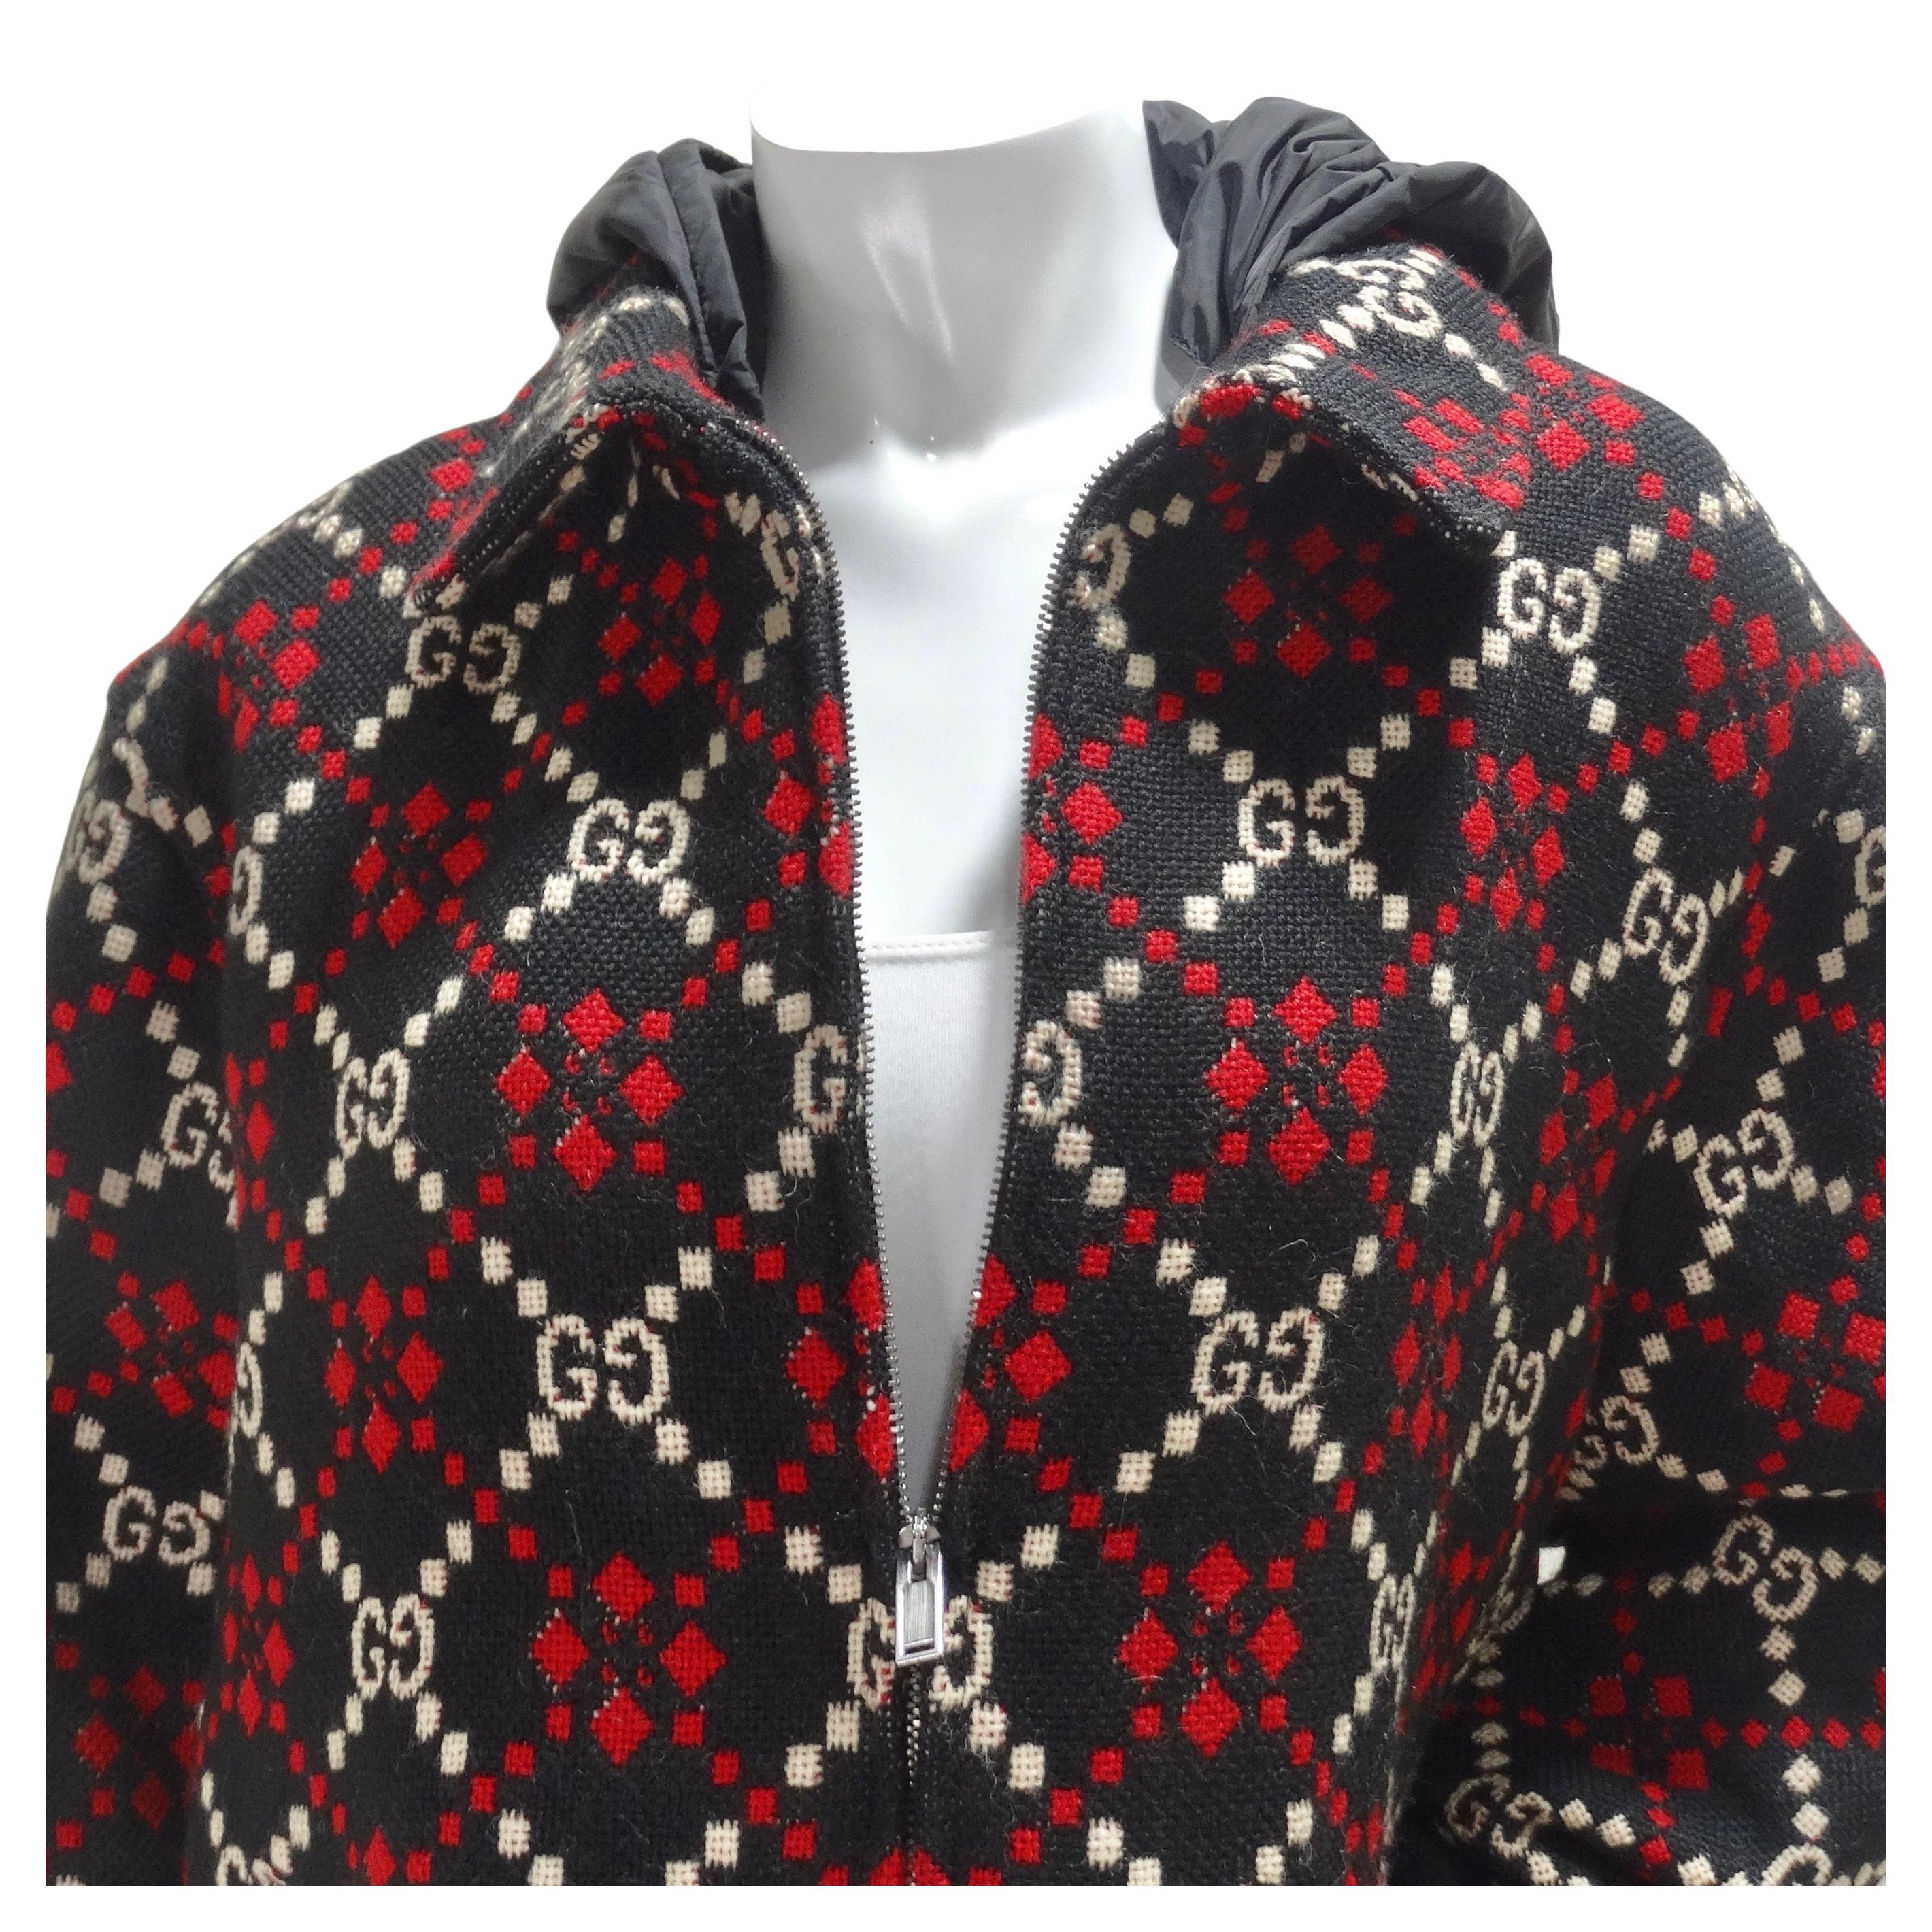 Amazing 100% wool Gucci jacket in Gucci's iconic GG monogram. Featuring a central zipper, side pockets, and ribbed cuffs at the sleeves completed by a nylon windbreaker style hood which creates such an eye catching contrast! The fabric of this